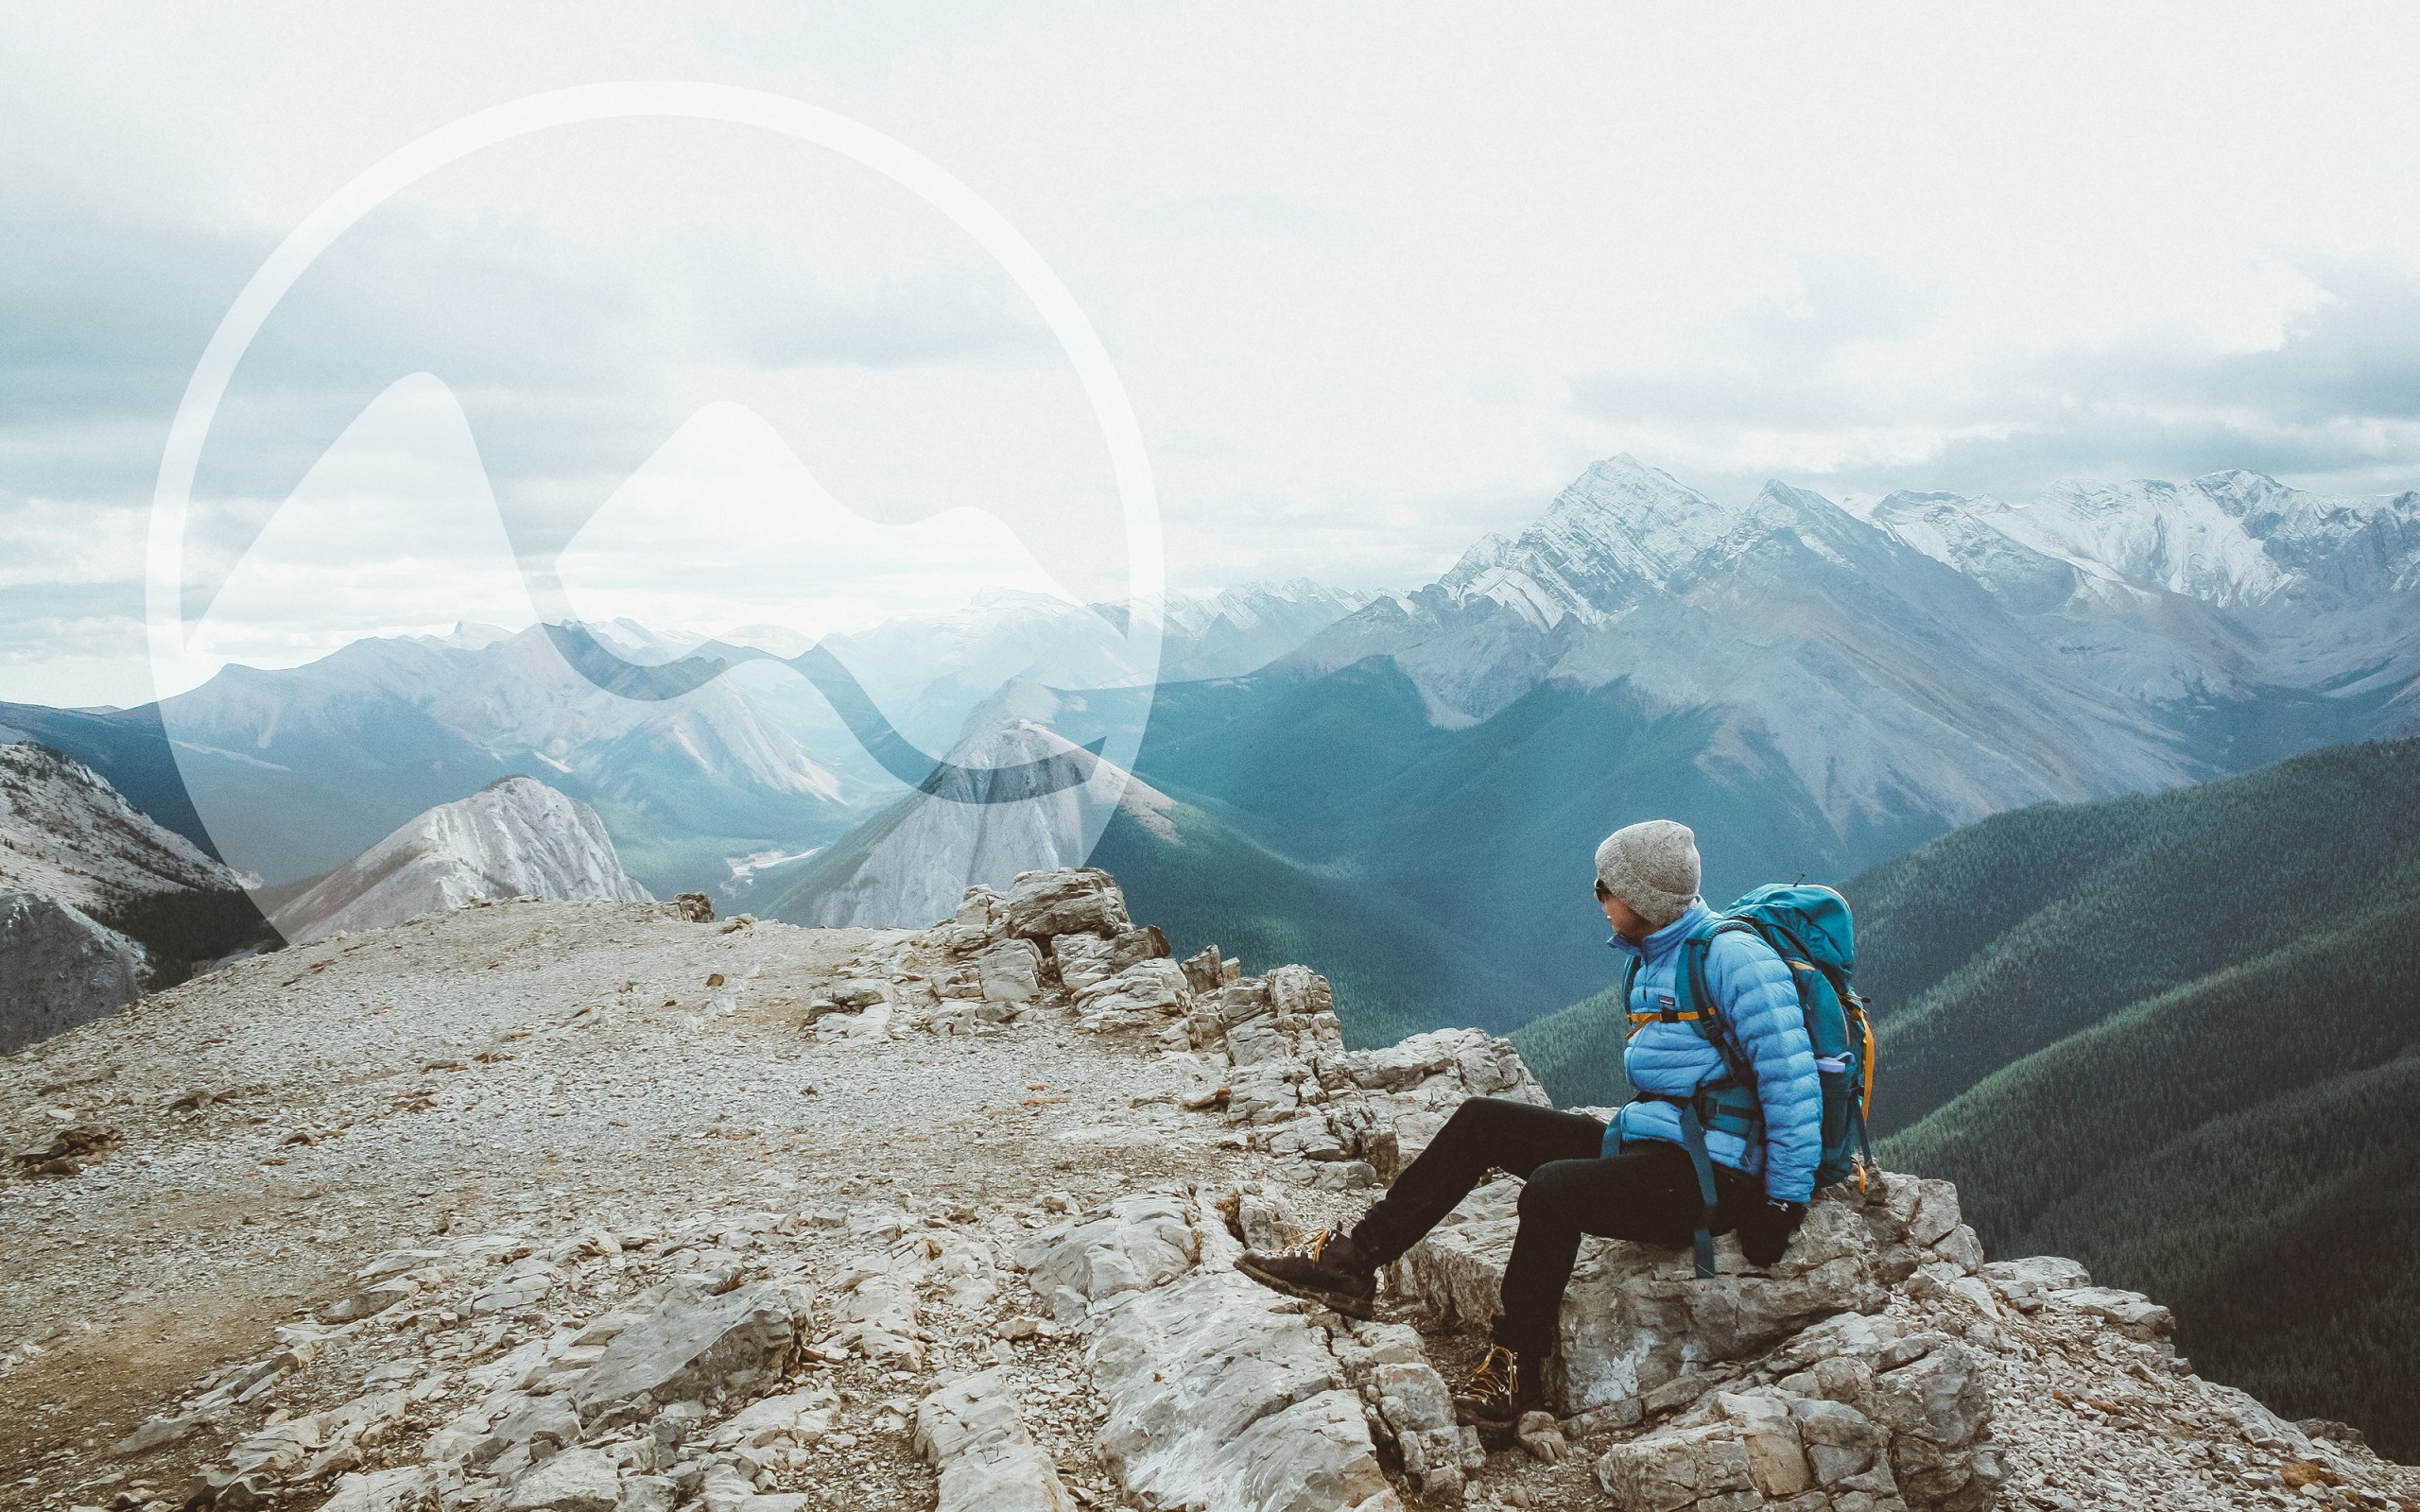 Hitchweb logo as a watermark on a photo of a hiker on a mountain.